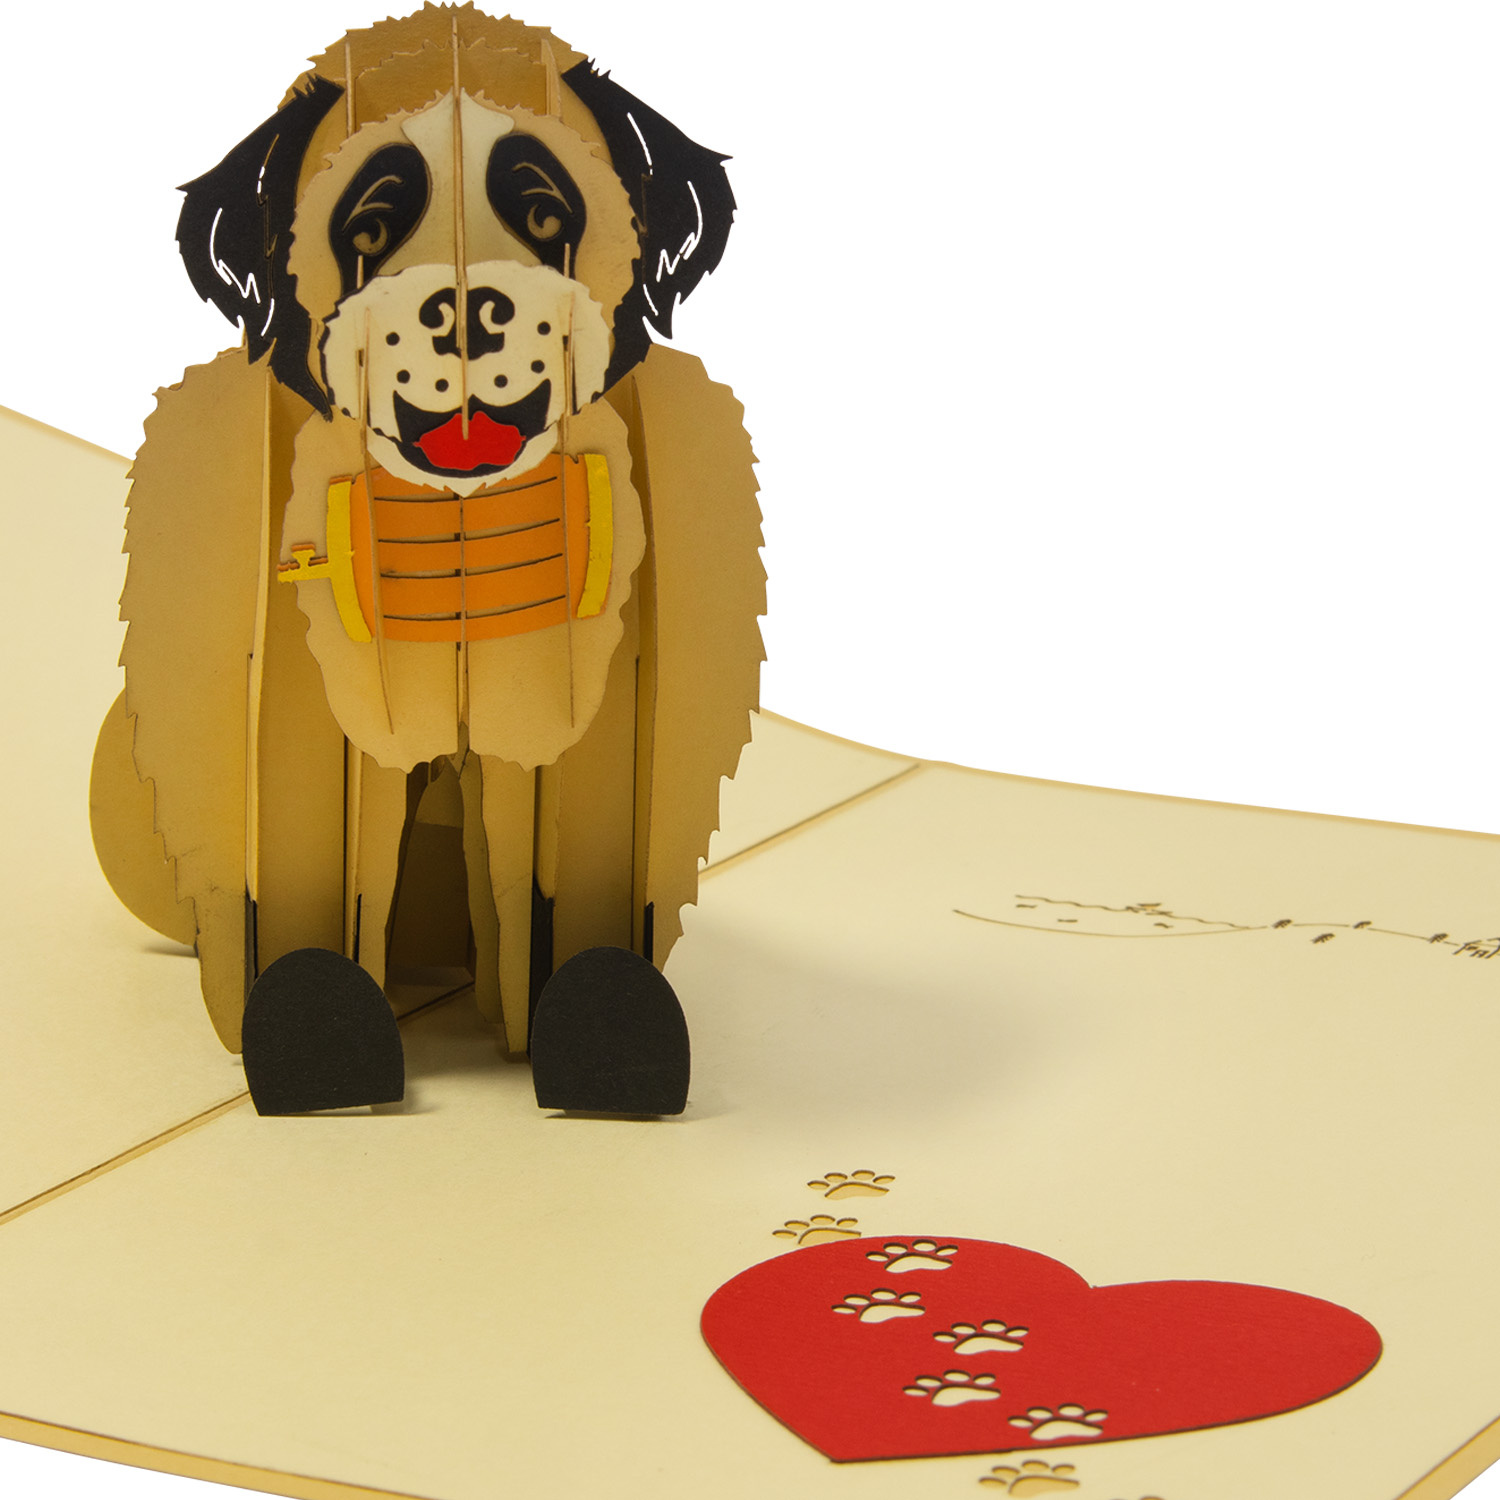 LINPOPUP LINPOPUP®, LIN17772, pop up card dog, birthday dog, dog with heart, 3d greeting card folding card rescue dog, dog, N398